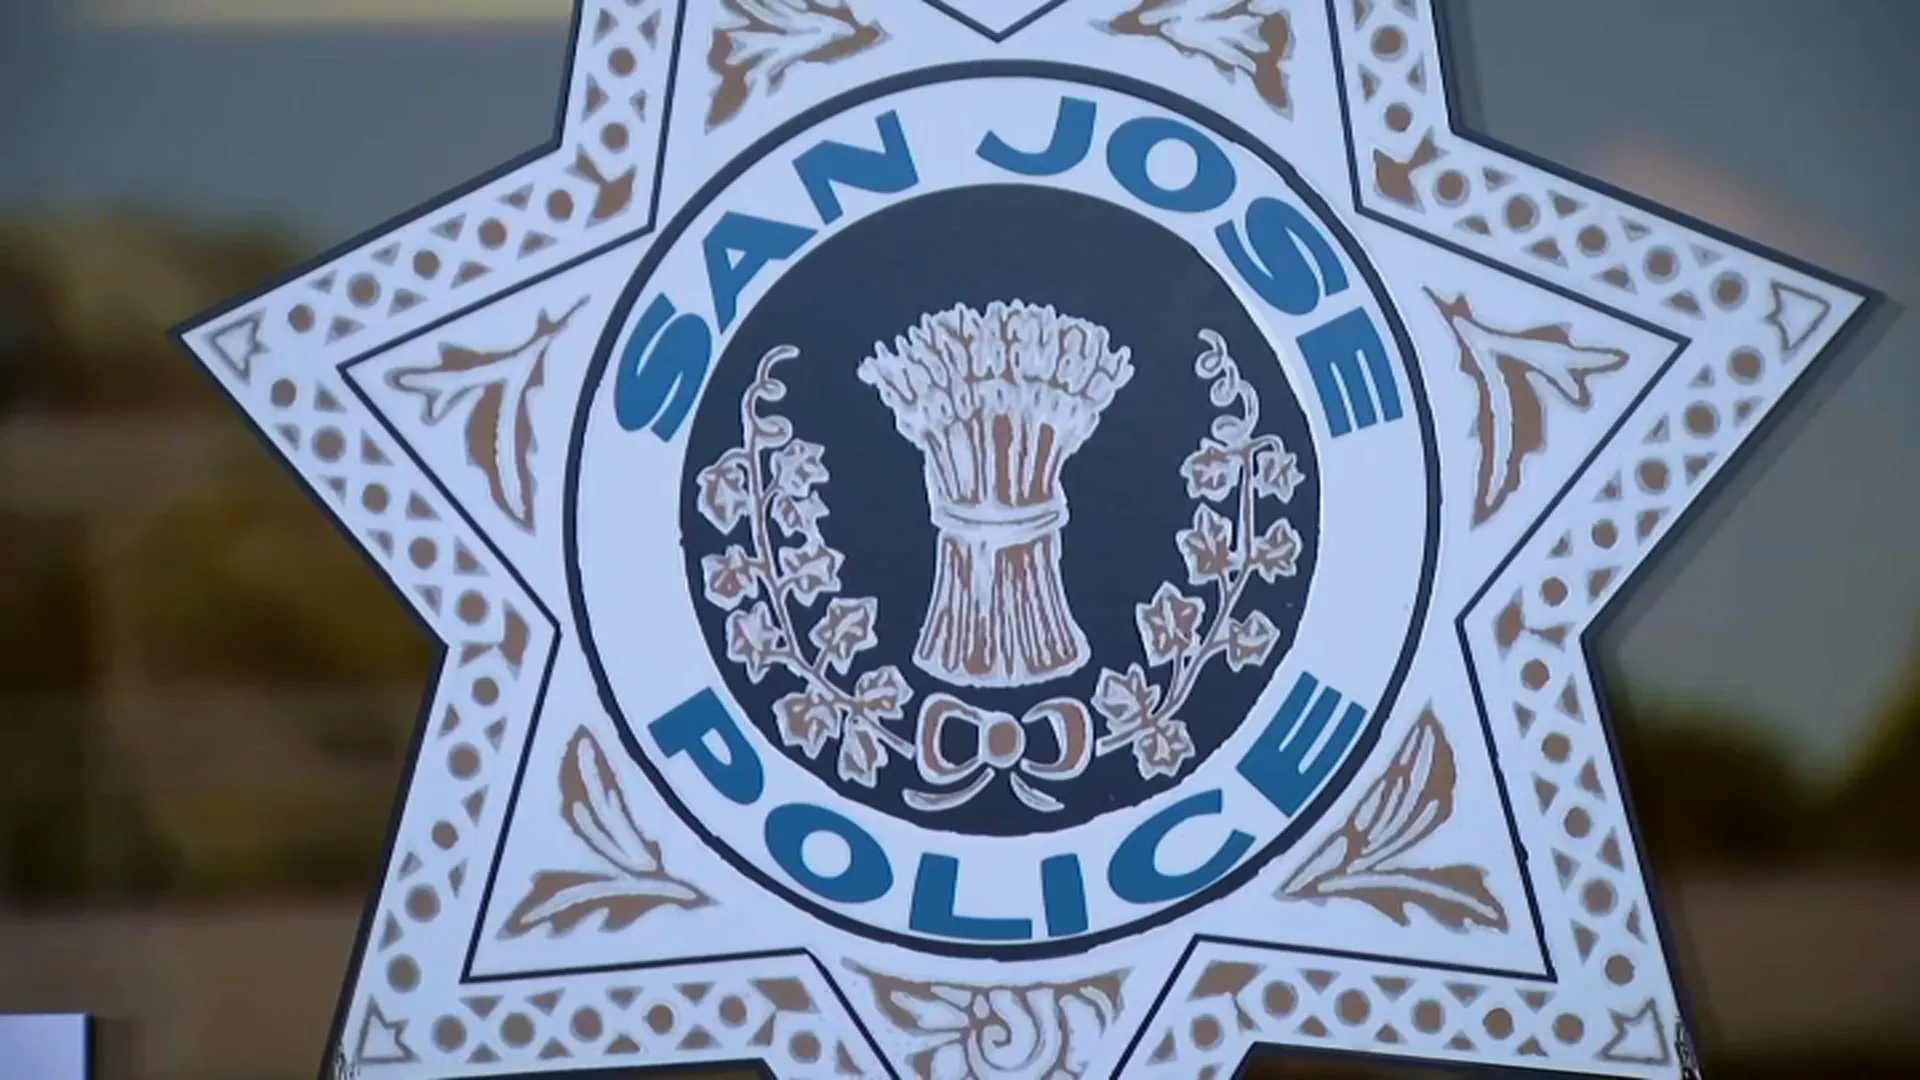 San Jose begins the year with a concerning increase in homicide cases